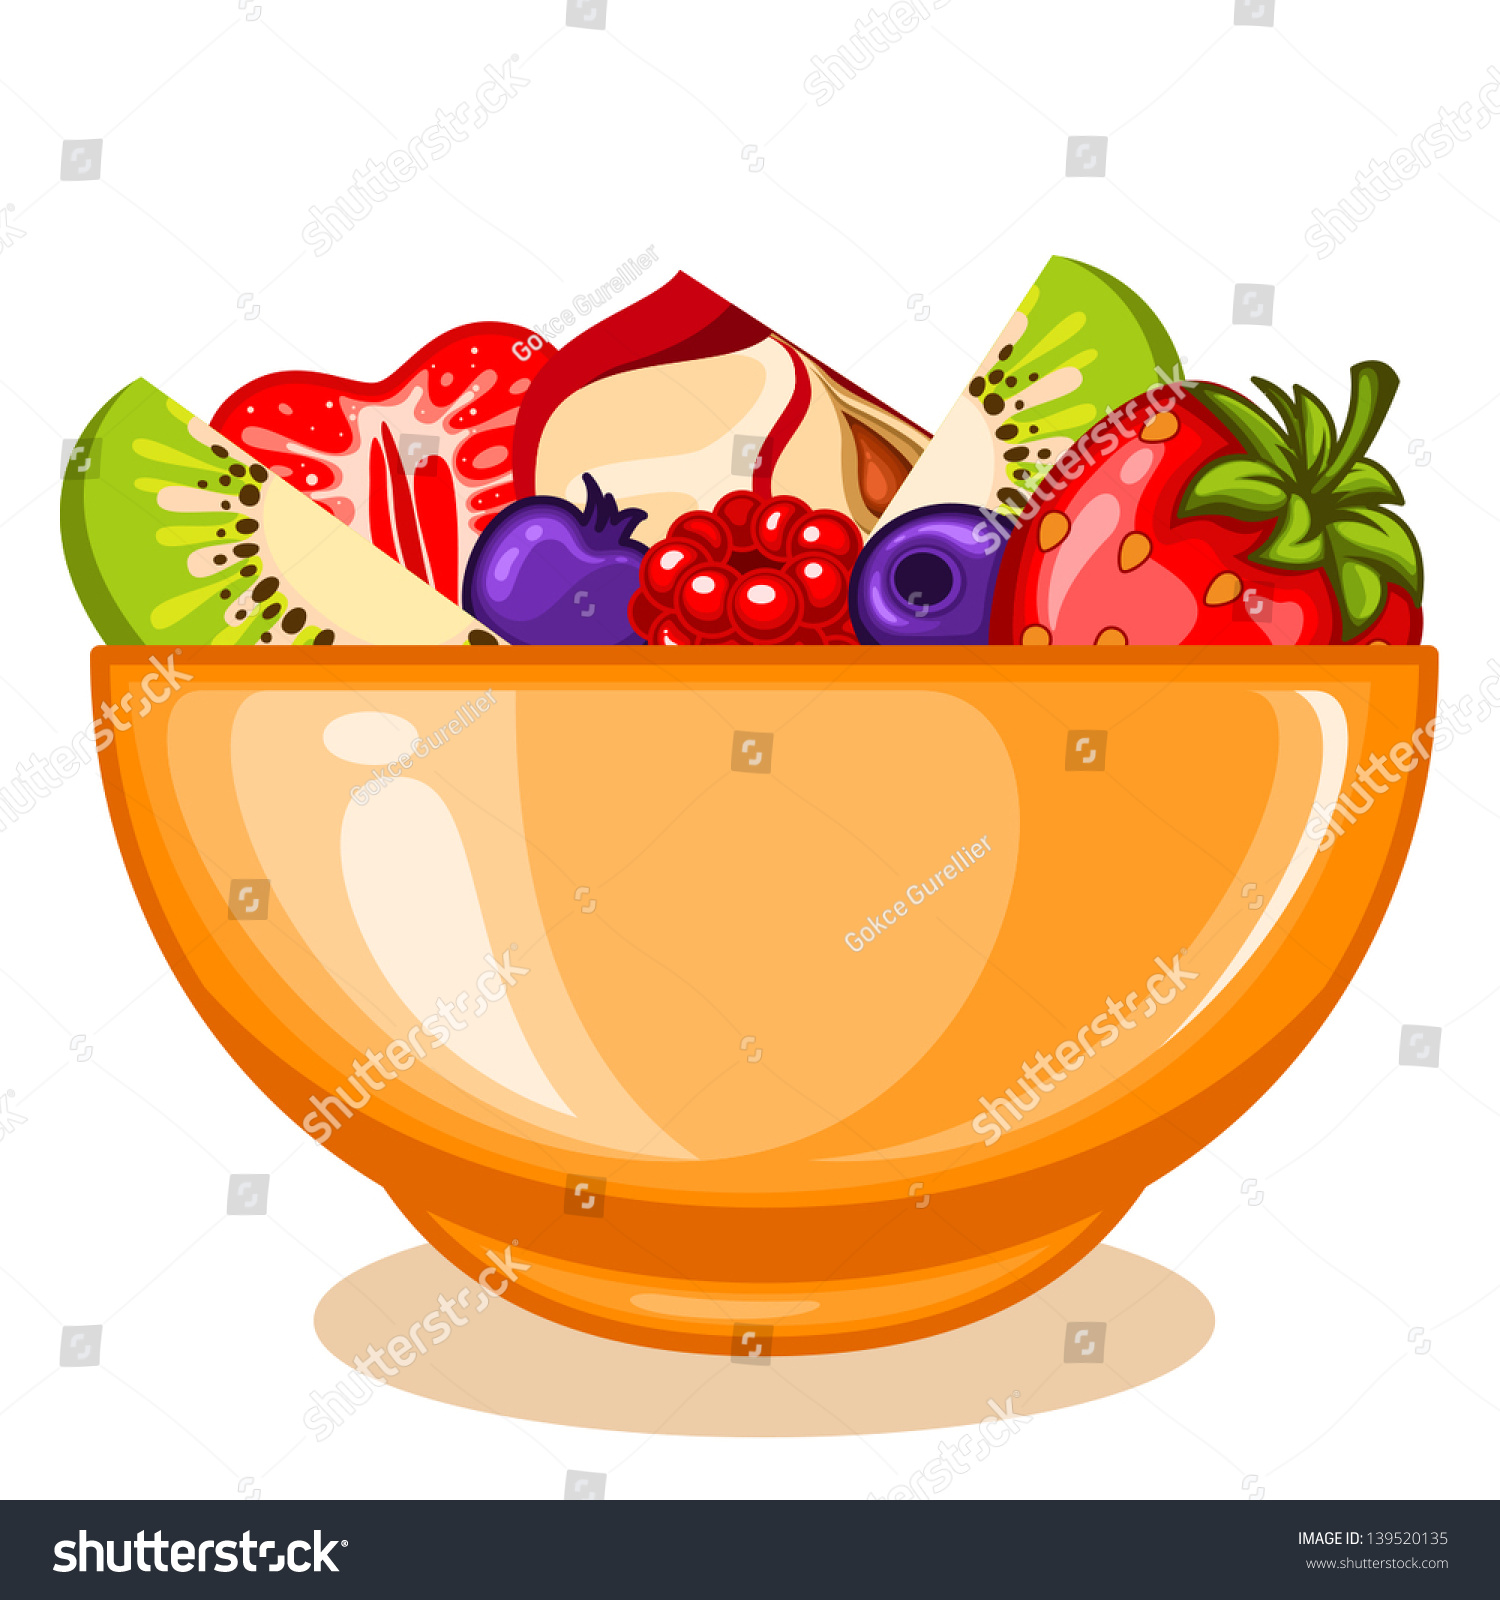 free clipart bowl of fruit - photo #17